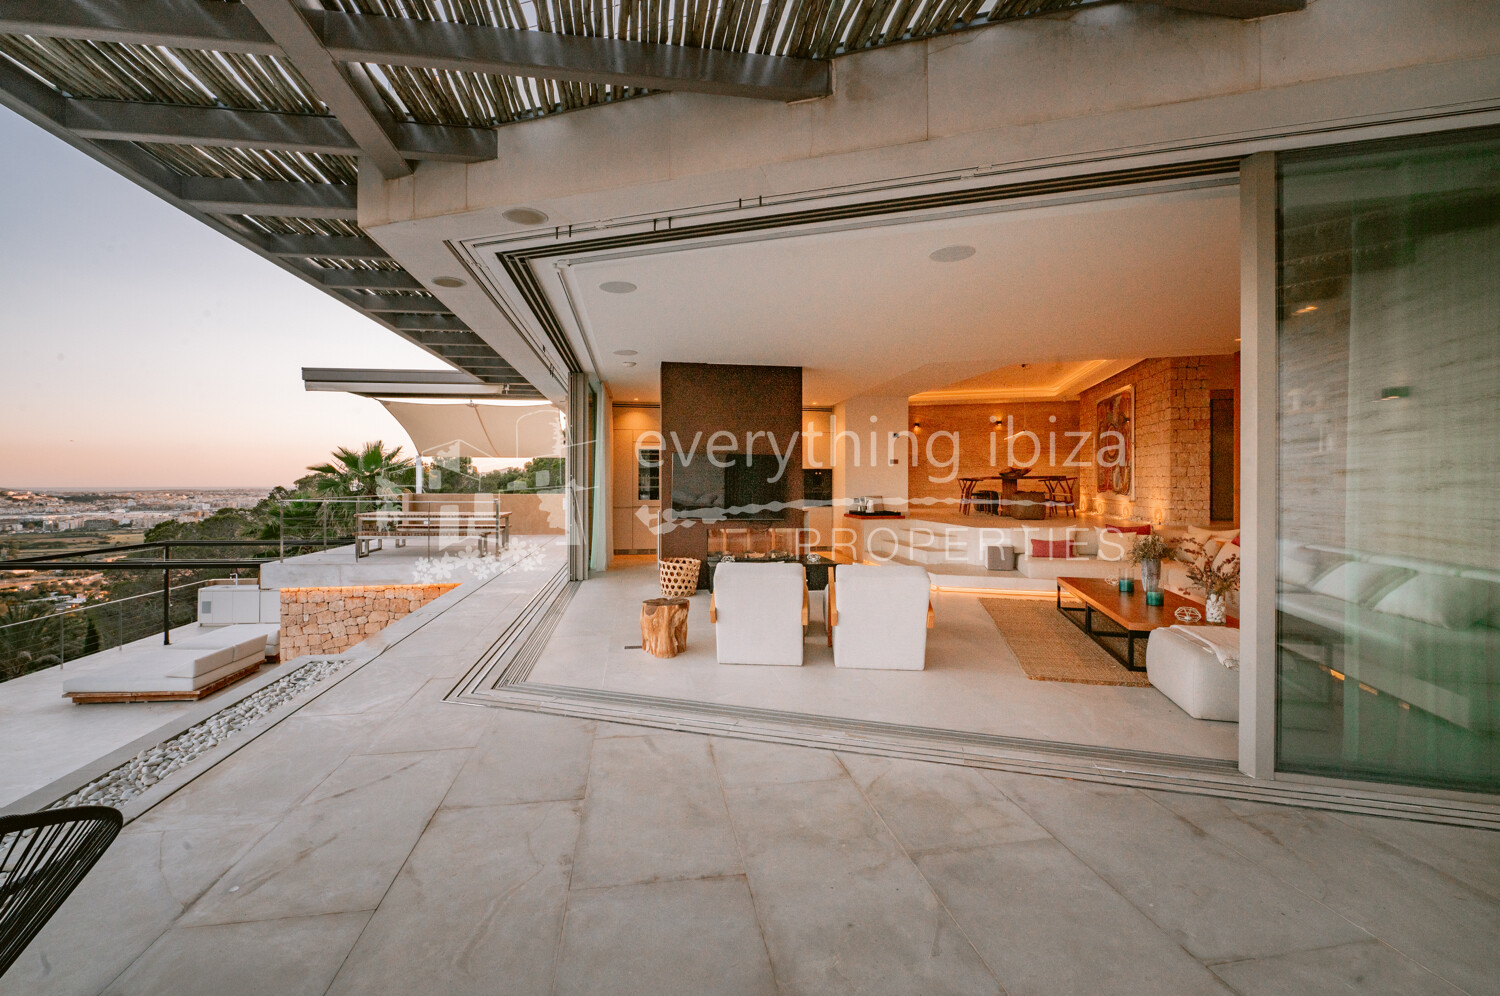 Stunning Contemporary 6 Bedroom Villa with Amazing Panoramic Views, ref. 1718, for sale in Ibiza by everything ibiza Properties